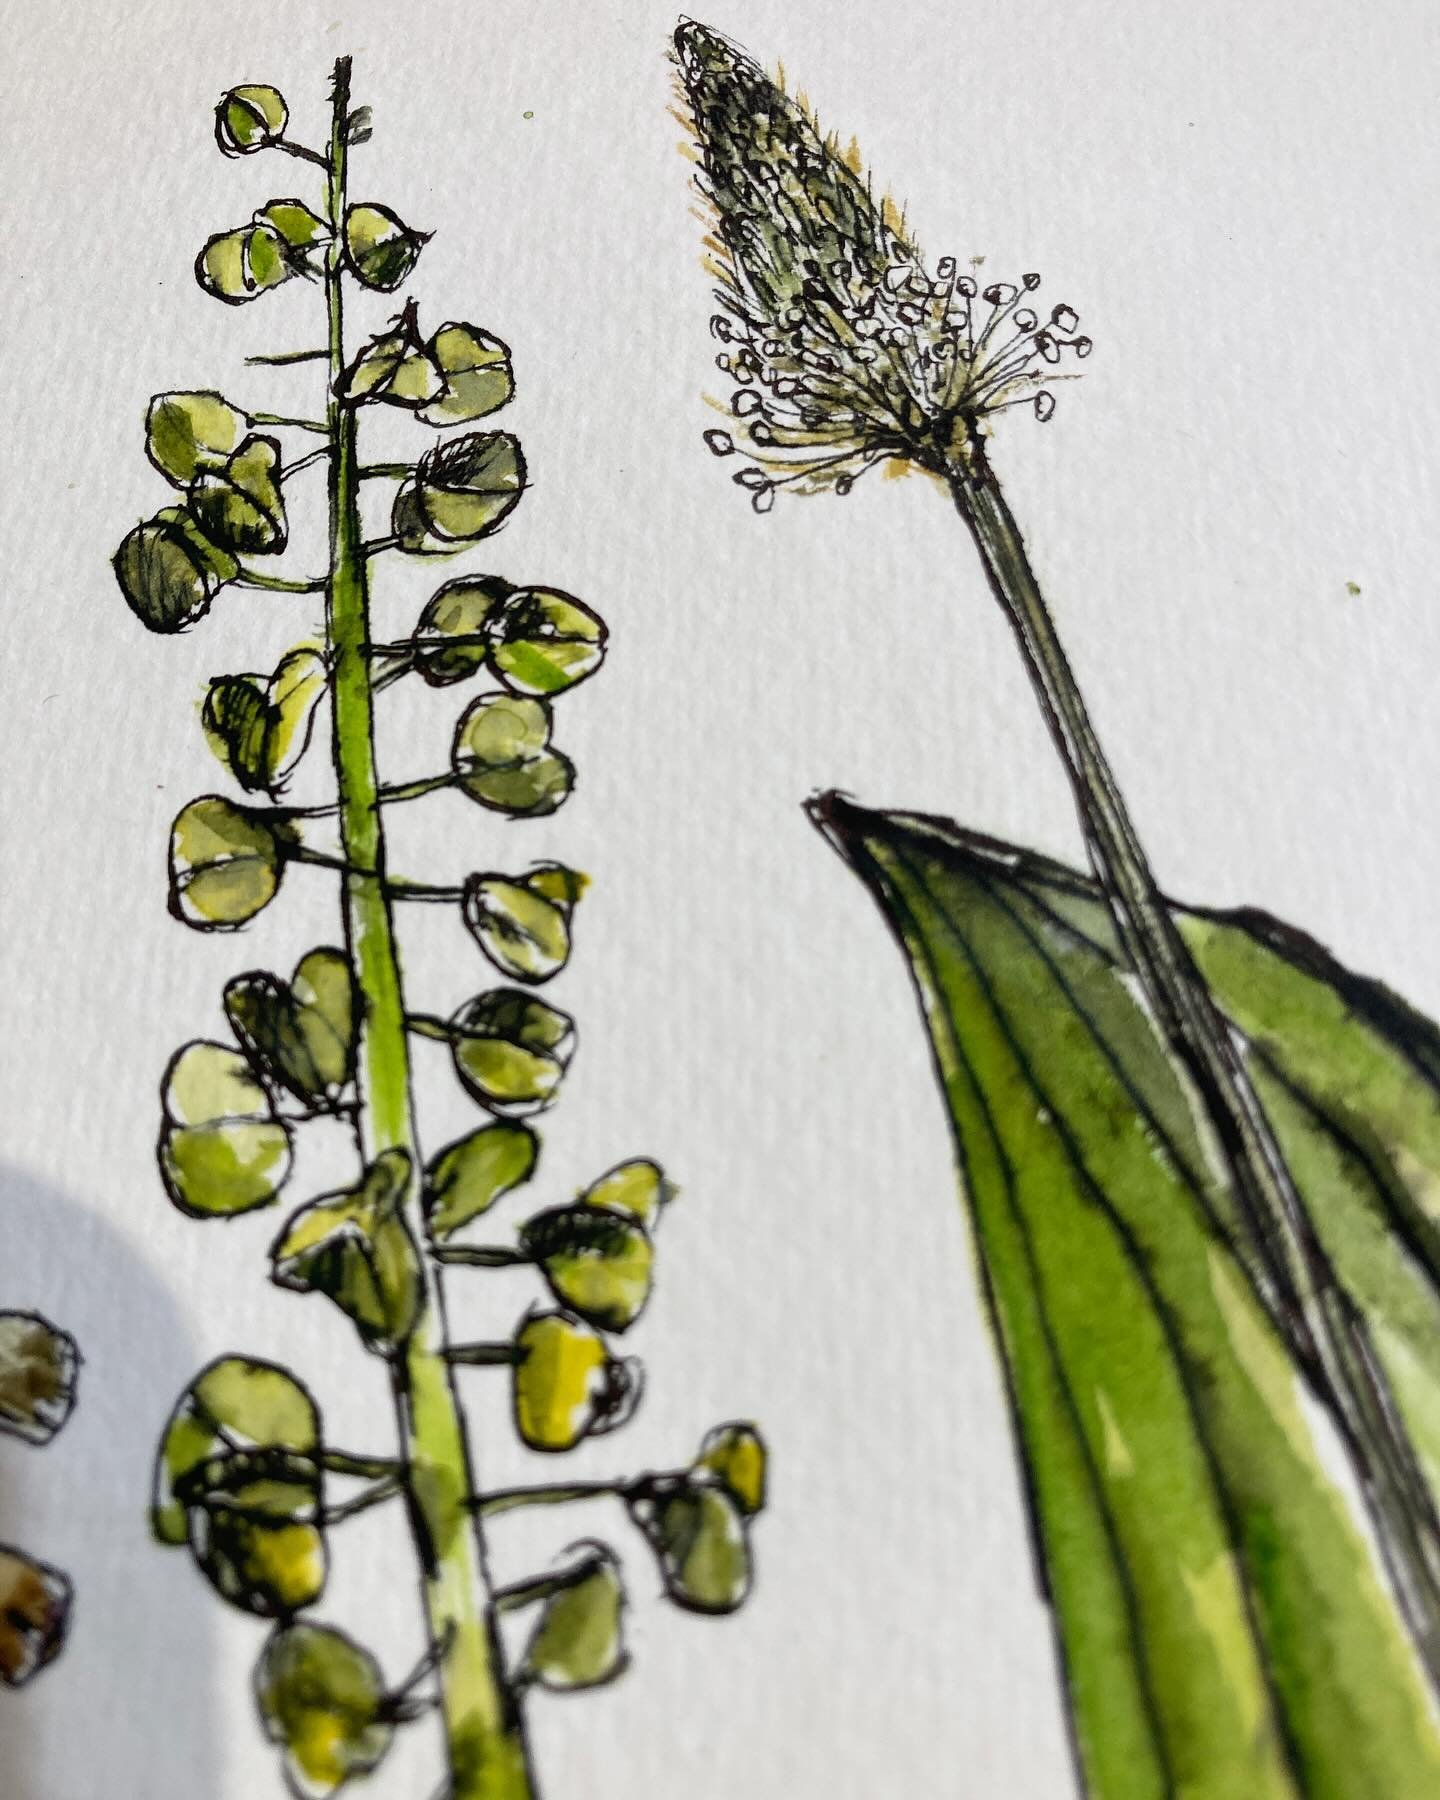 Plantain and Muscari comosum - love the eccentricity of these plants from the whacky flowers to the curious seed heads. Great to draw and paint as well.

#suenichollsdesigns #penandink #watercolours #muscaricomosum #plantagolanceolata #inspiredbynatu